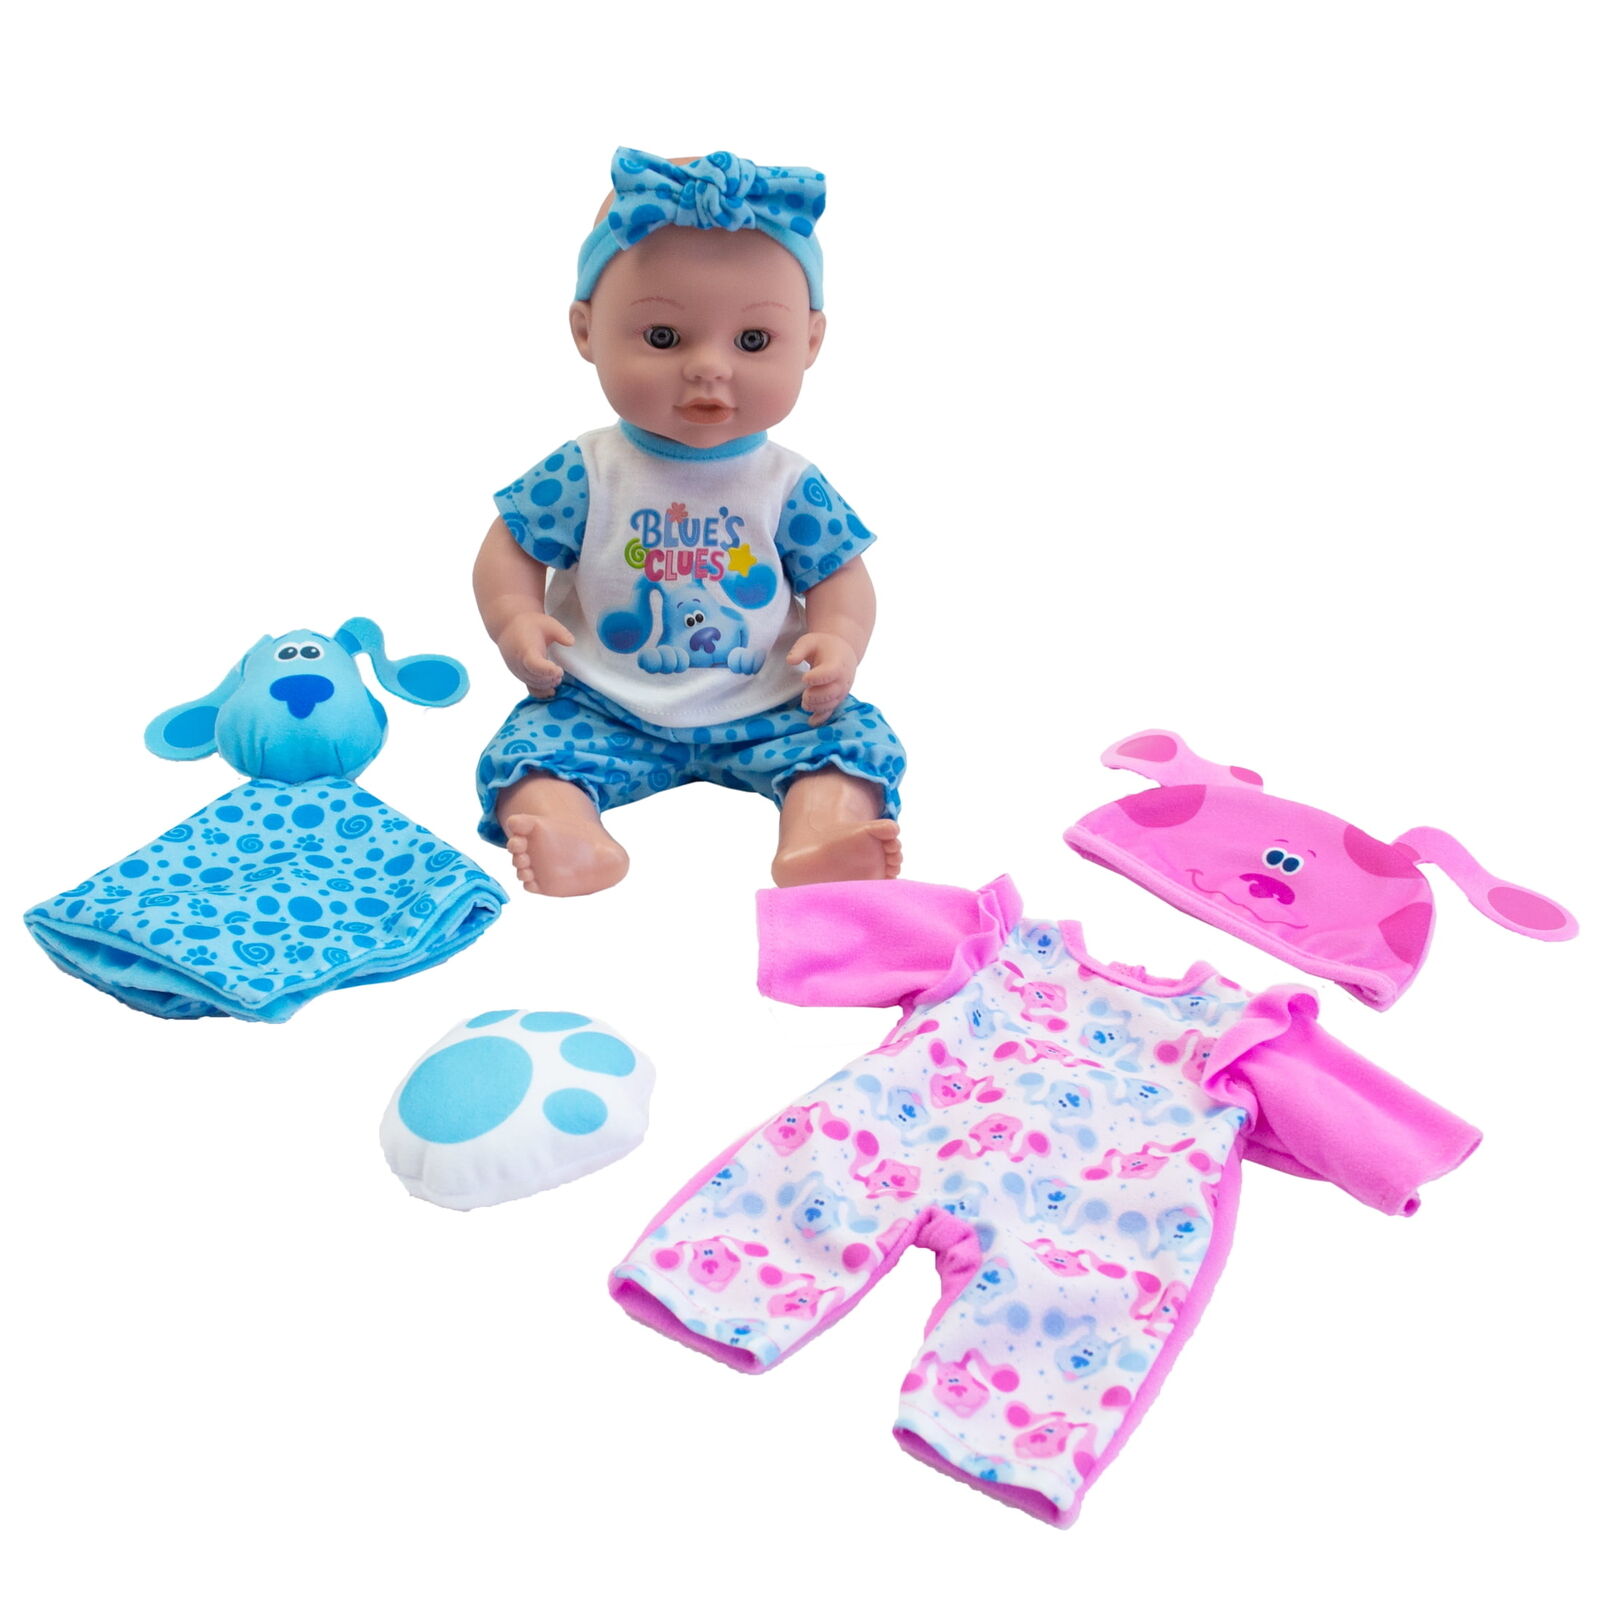  Blue Clues & You Baby Doll Play Set, Light Skin Tone, 8 Pieces